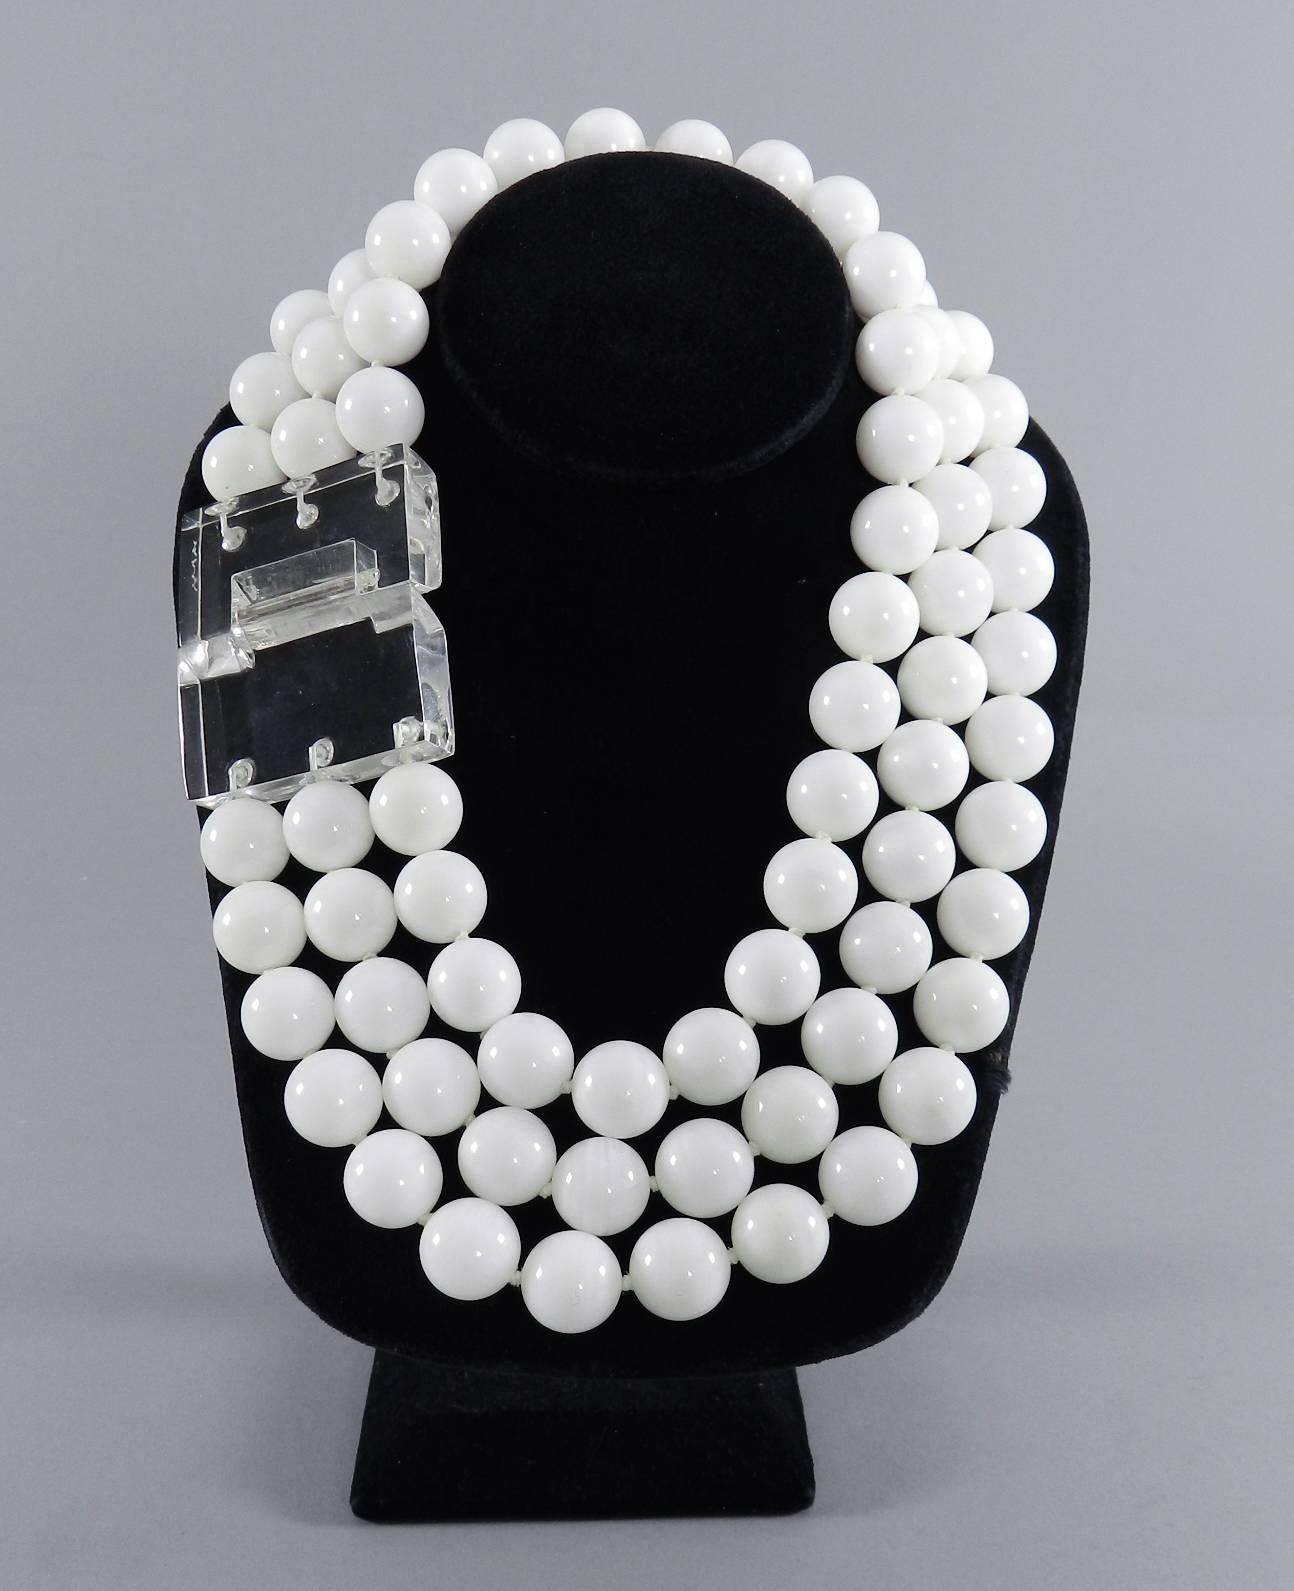 Patricia von Musulin triple strand beaded necklace with clear lucite clasp. 17mm white onyx beads. Shortest strand is about 17